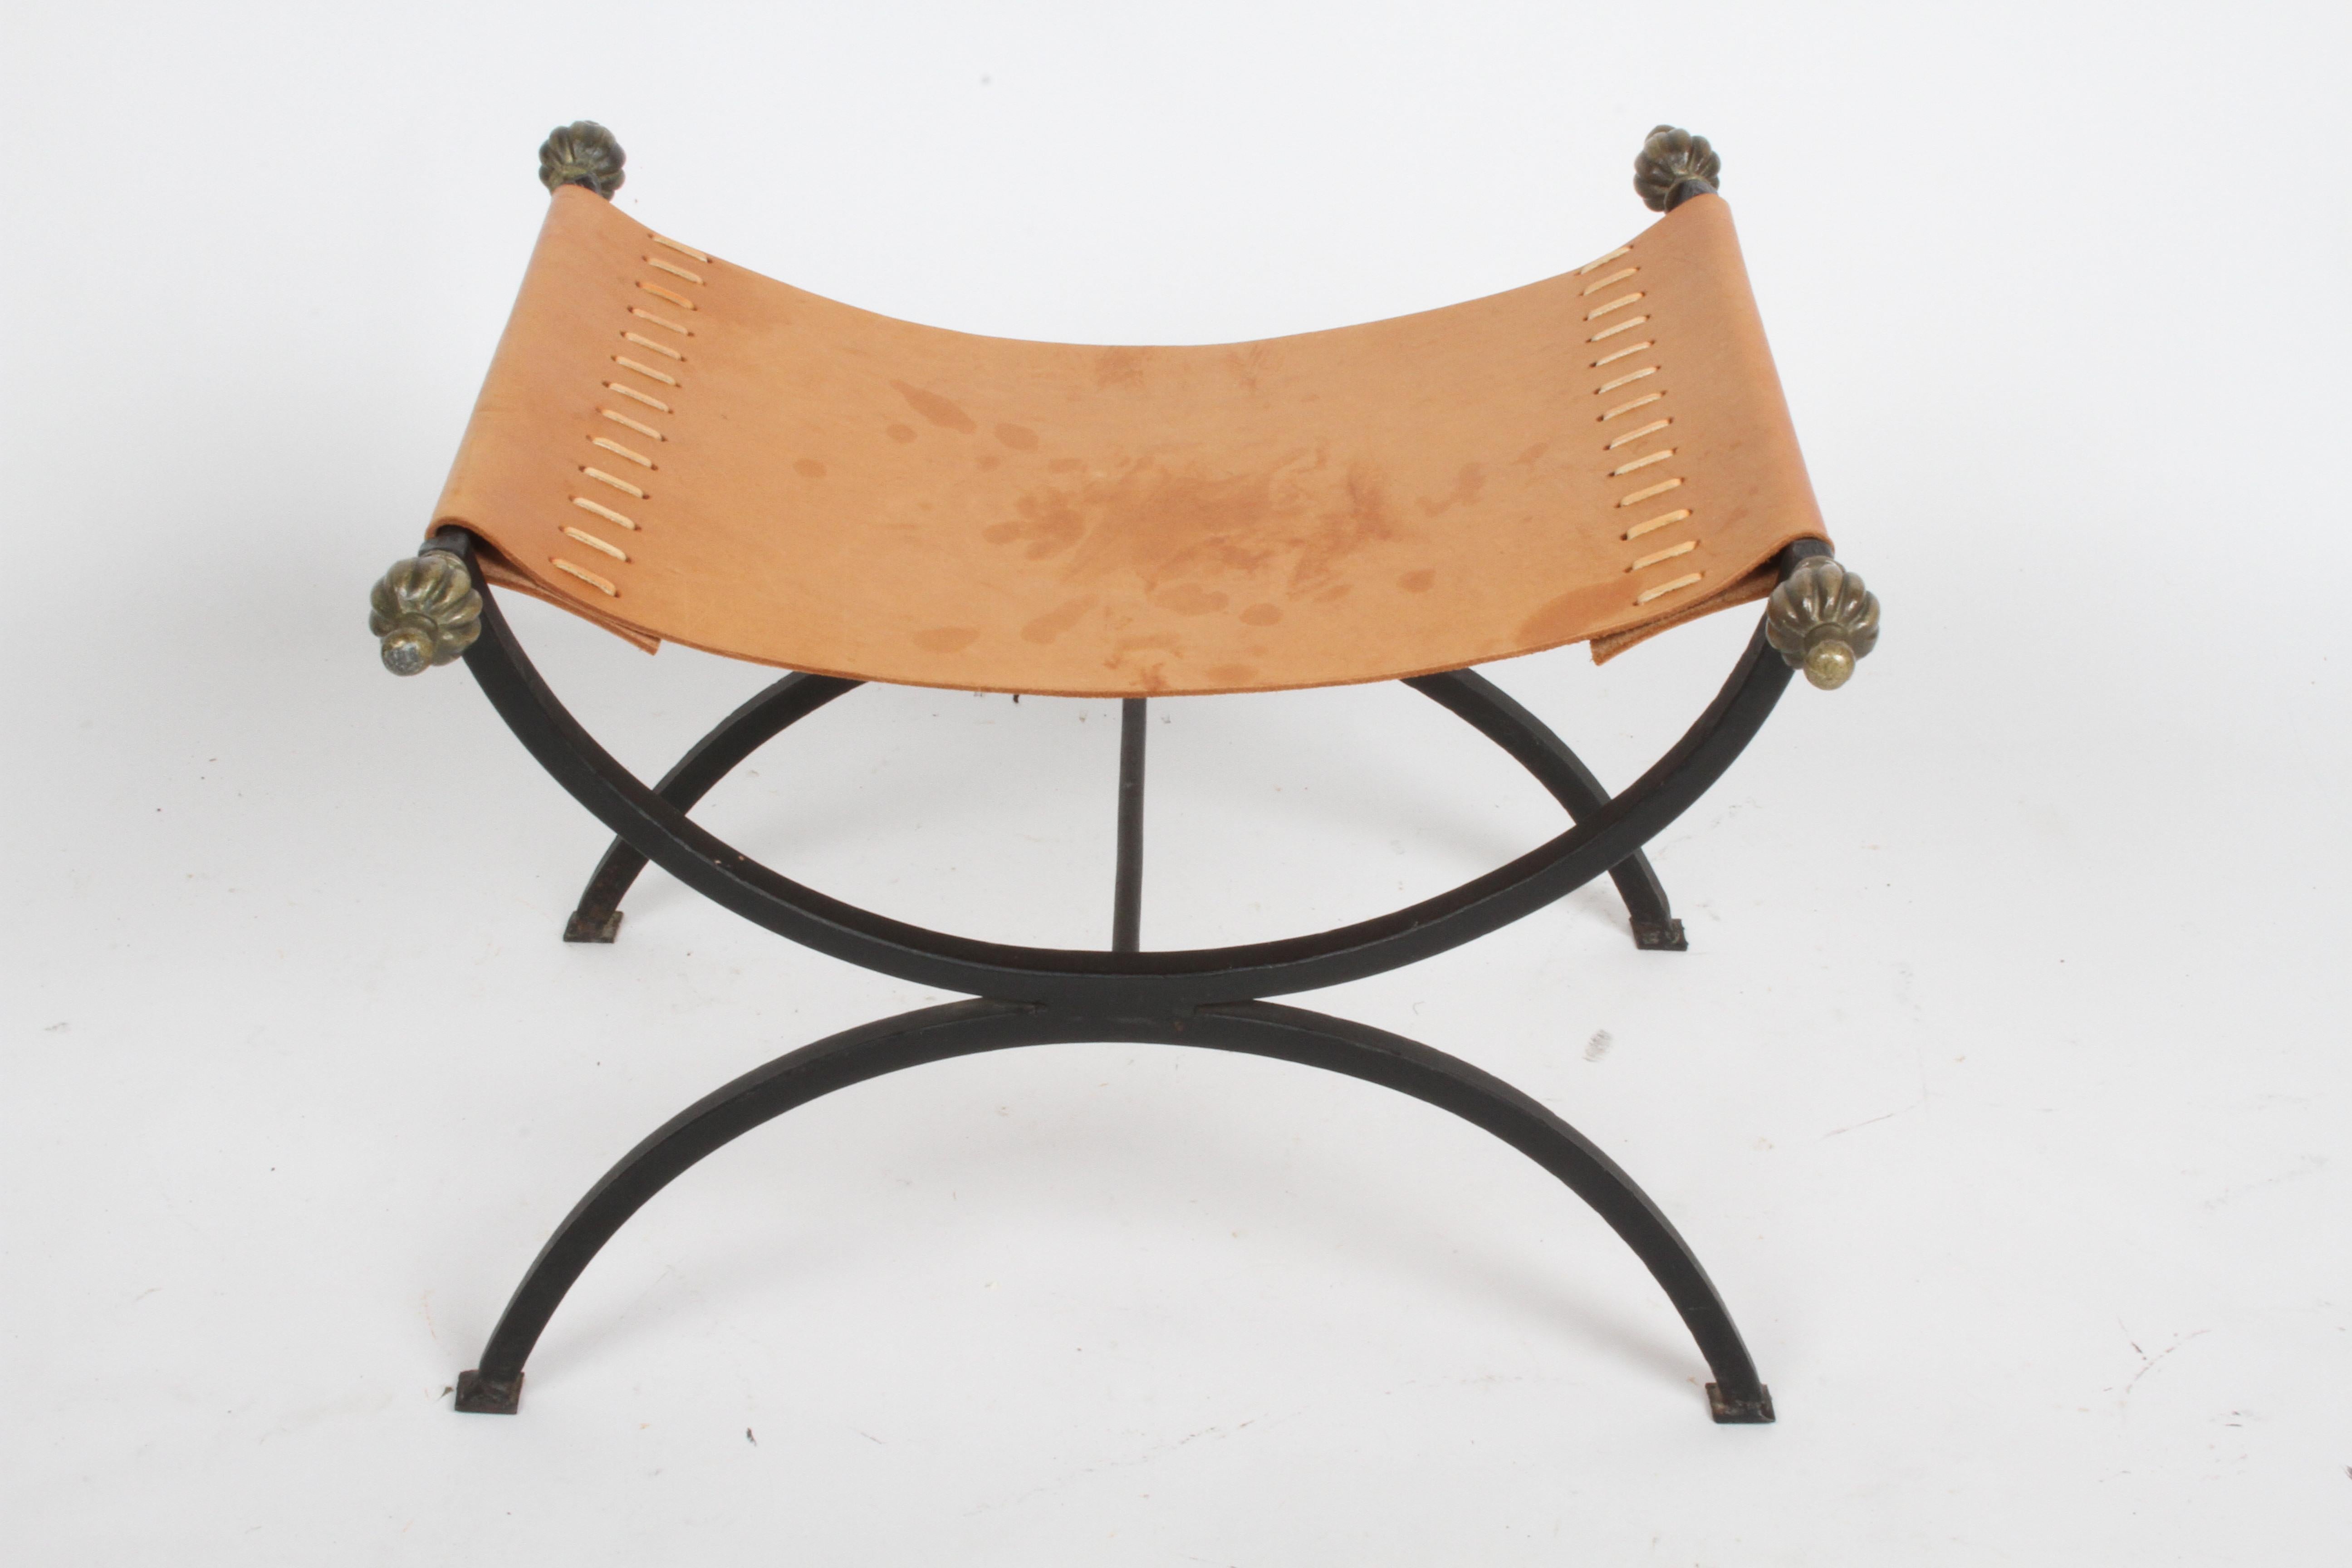 Wonderful Mid-Century Italian Savonarola bench, made of wrought iron with natural leather seat and bronze finials. Hand stitched leather strapping to seat. Natural tan leather seat shows patina, otherwise no issues. Seat is 12.88